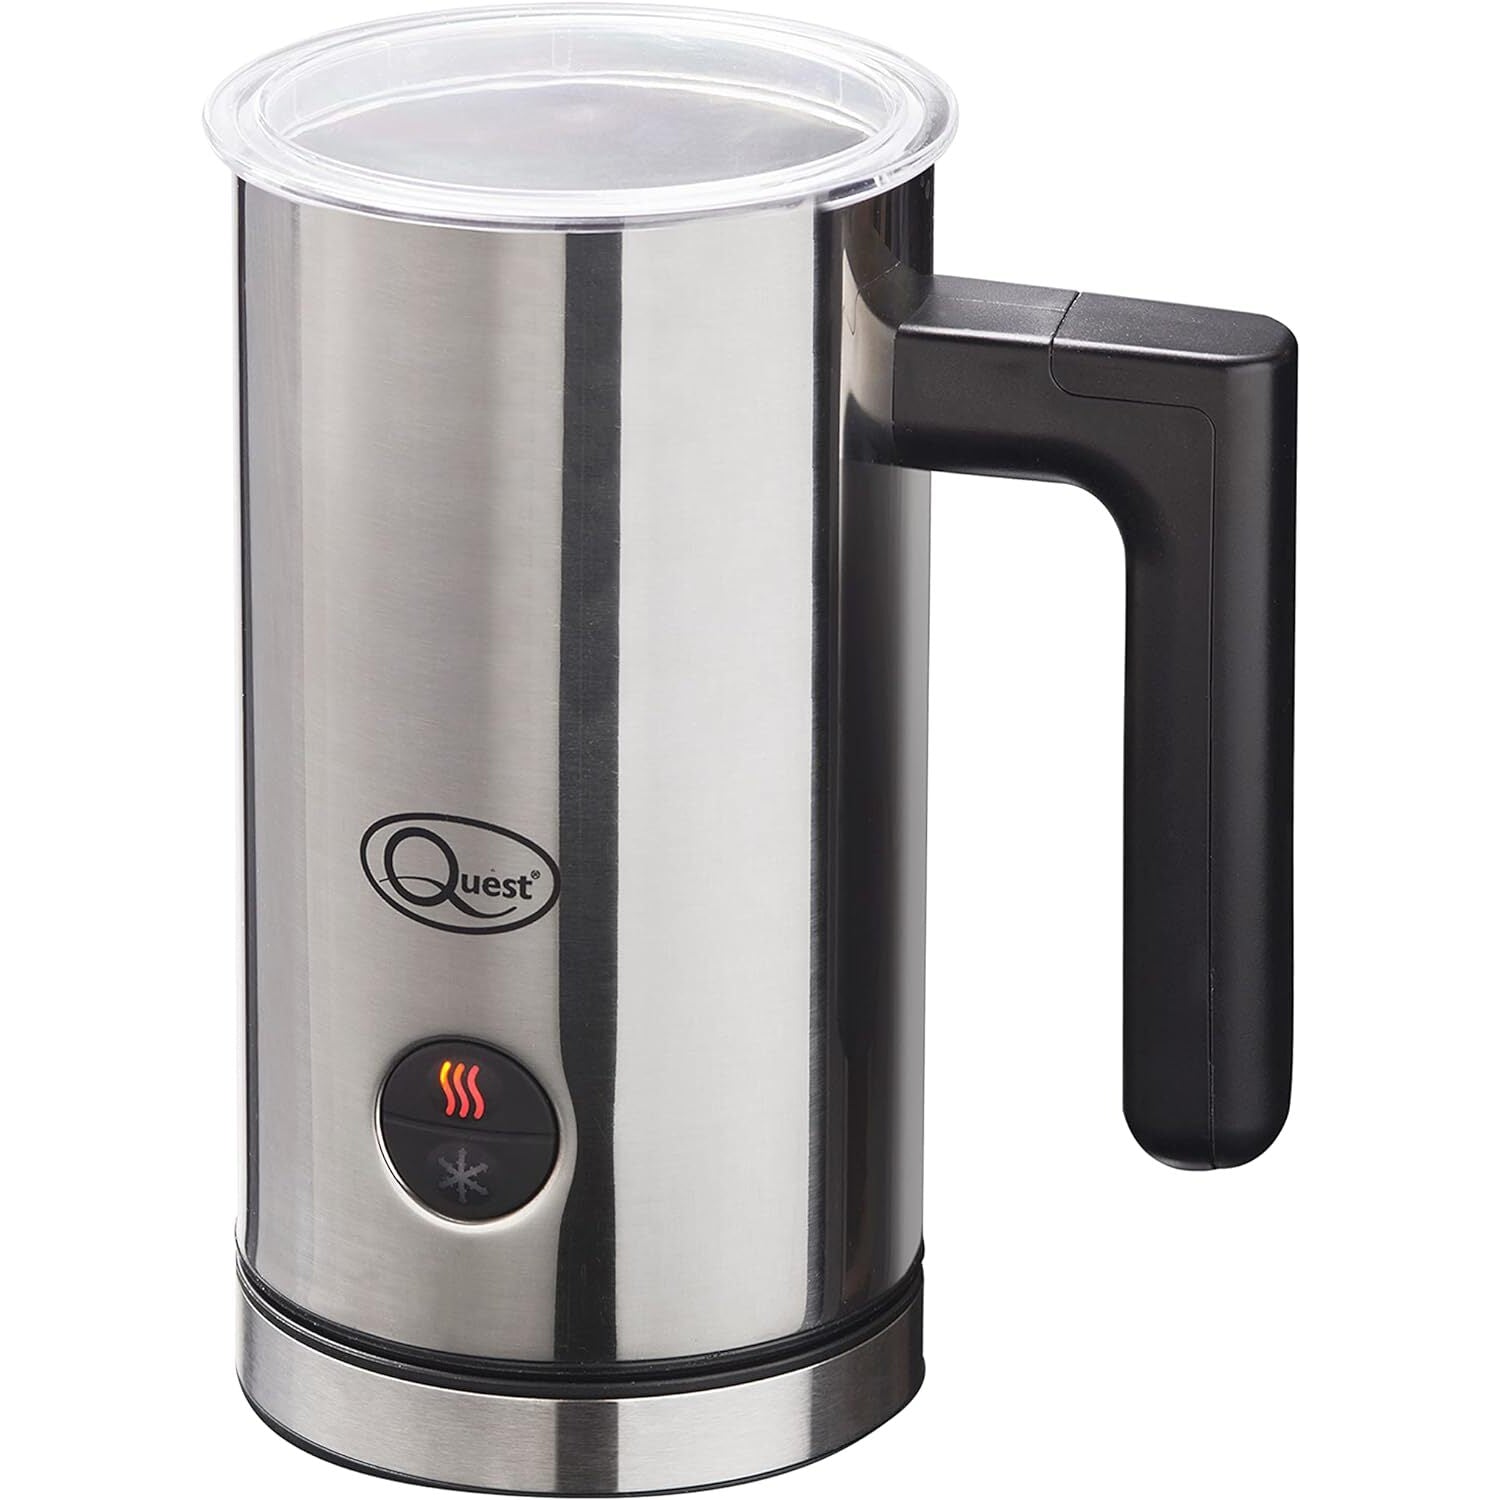 Quest Stainless Steel Automatic Milk Frother